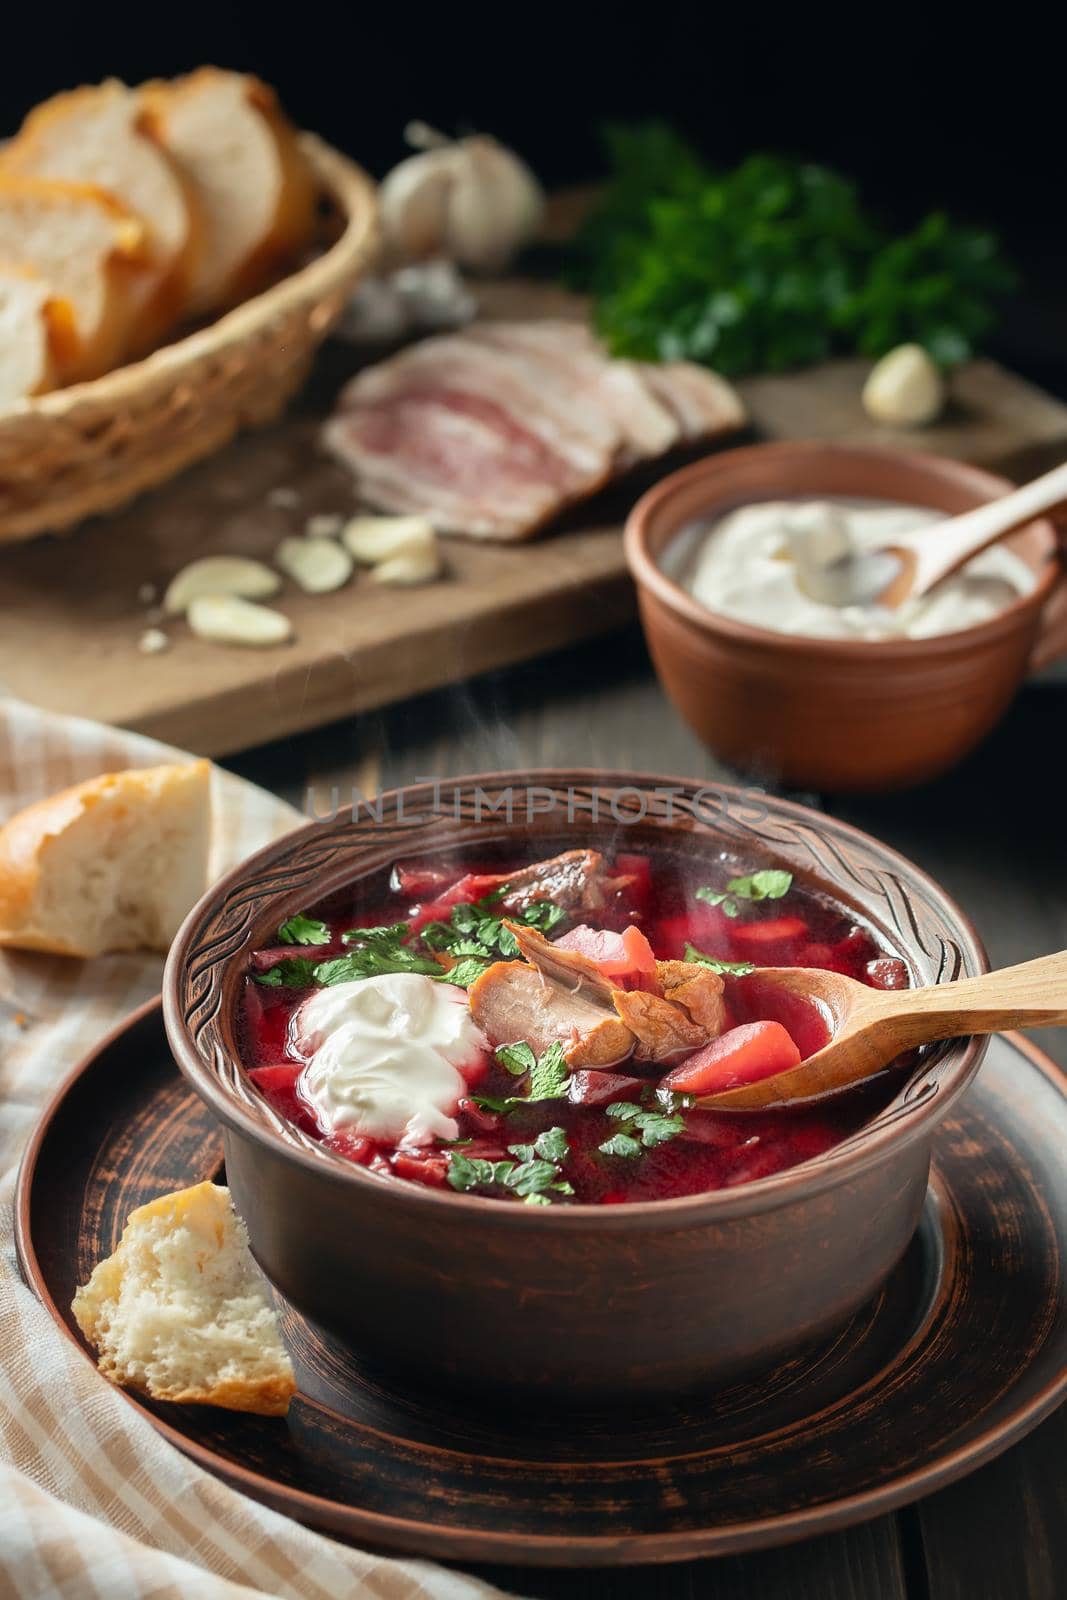 Freshly cooked borscht - traditional dish of Russian and Ukrainian cuisine in earthenware dishes with bacon, sour cream and garlic, vertical image.